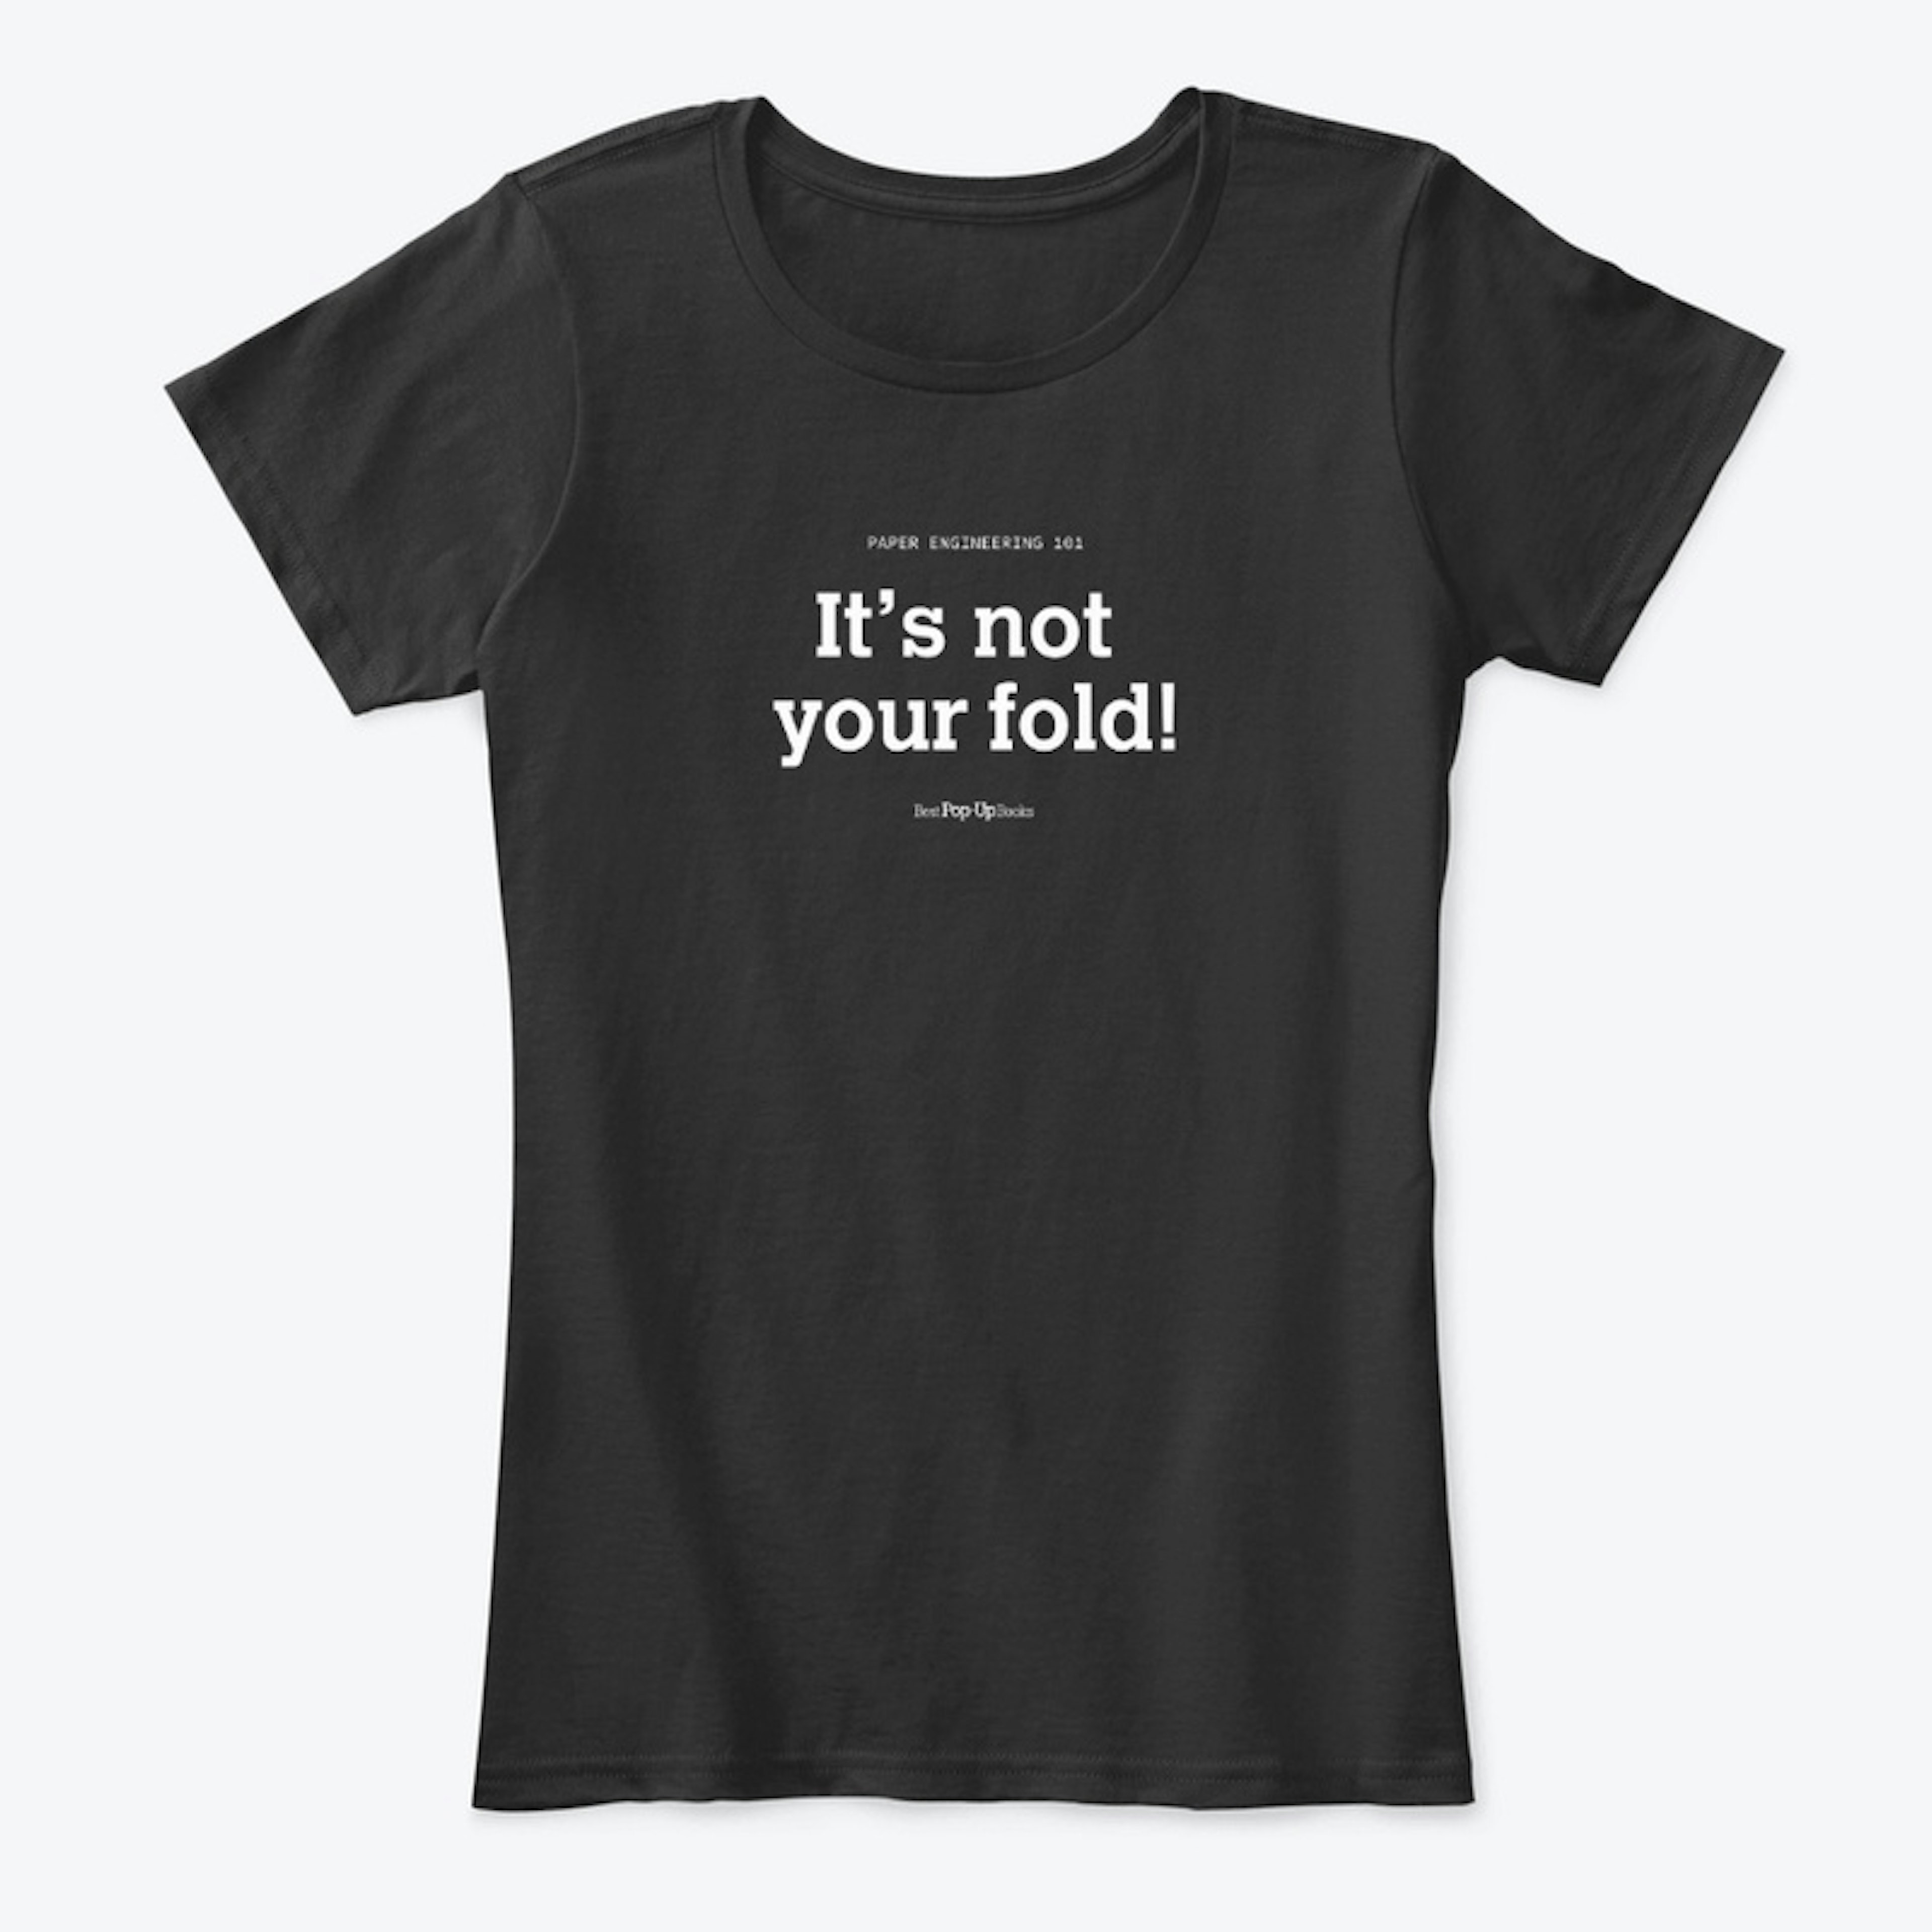 It's not your fold T-shirt Black